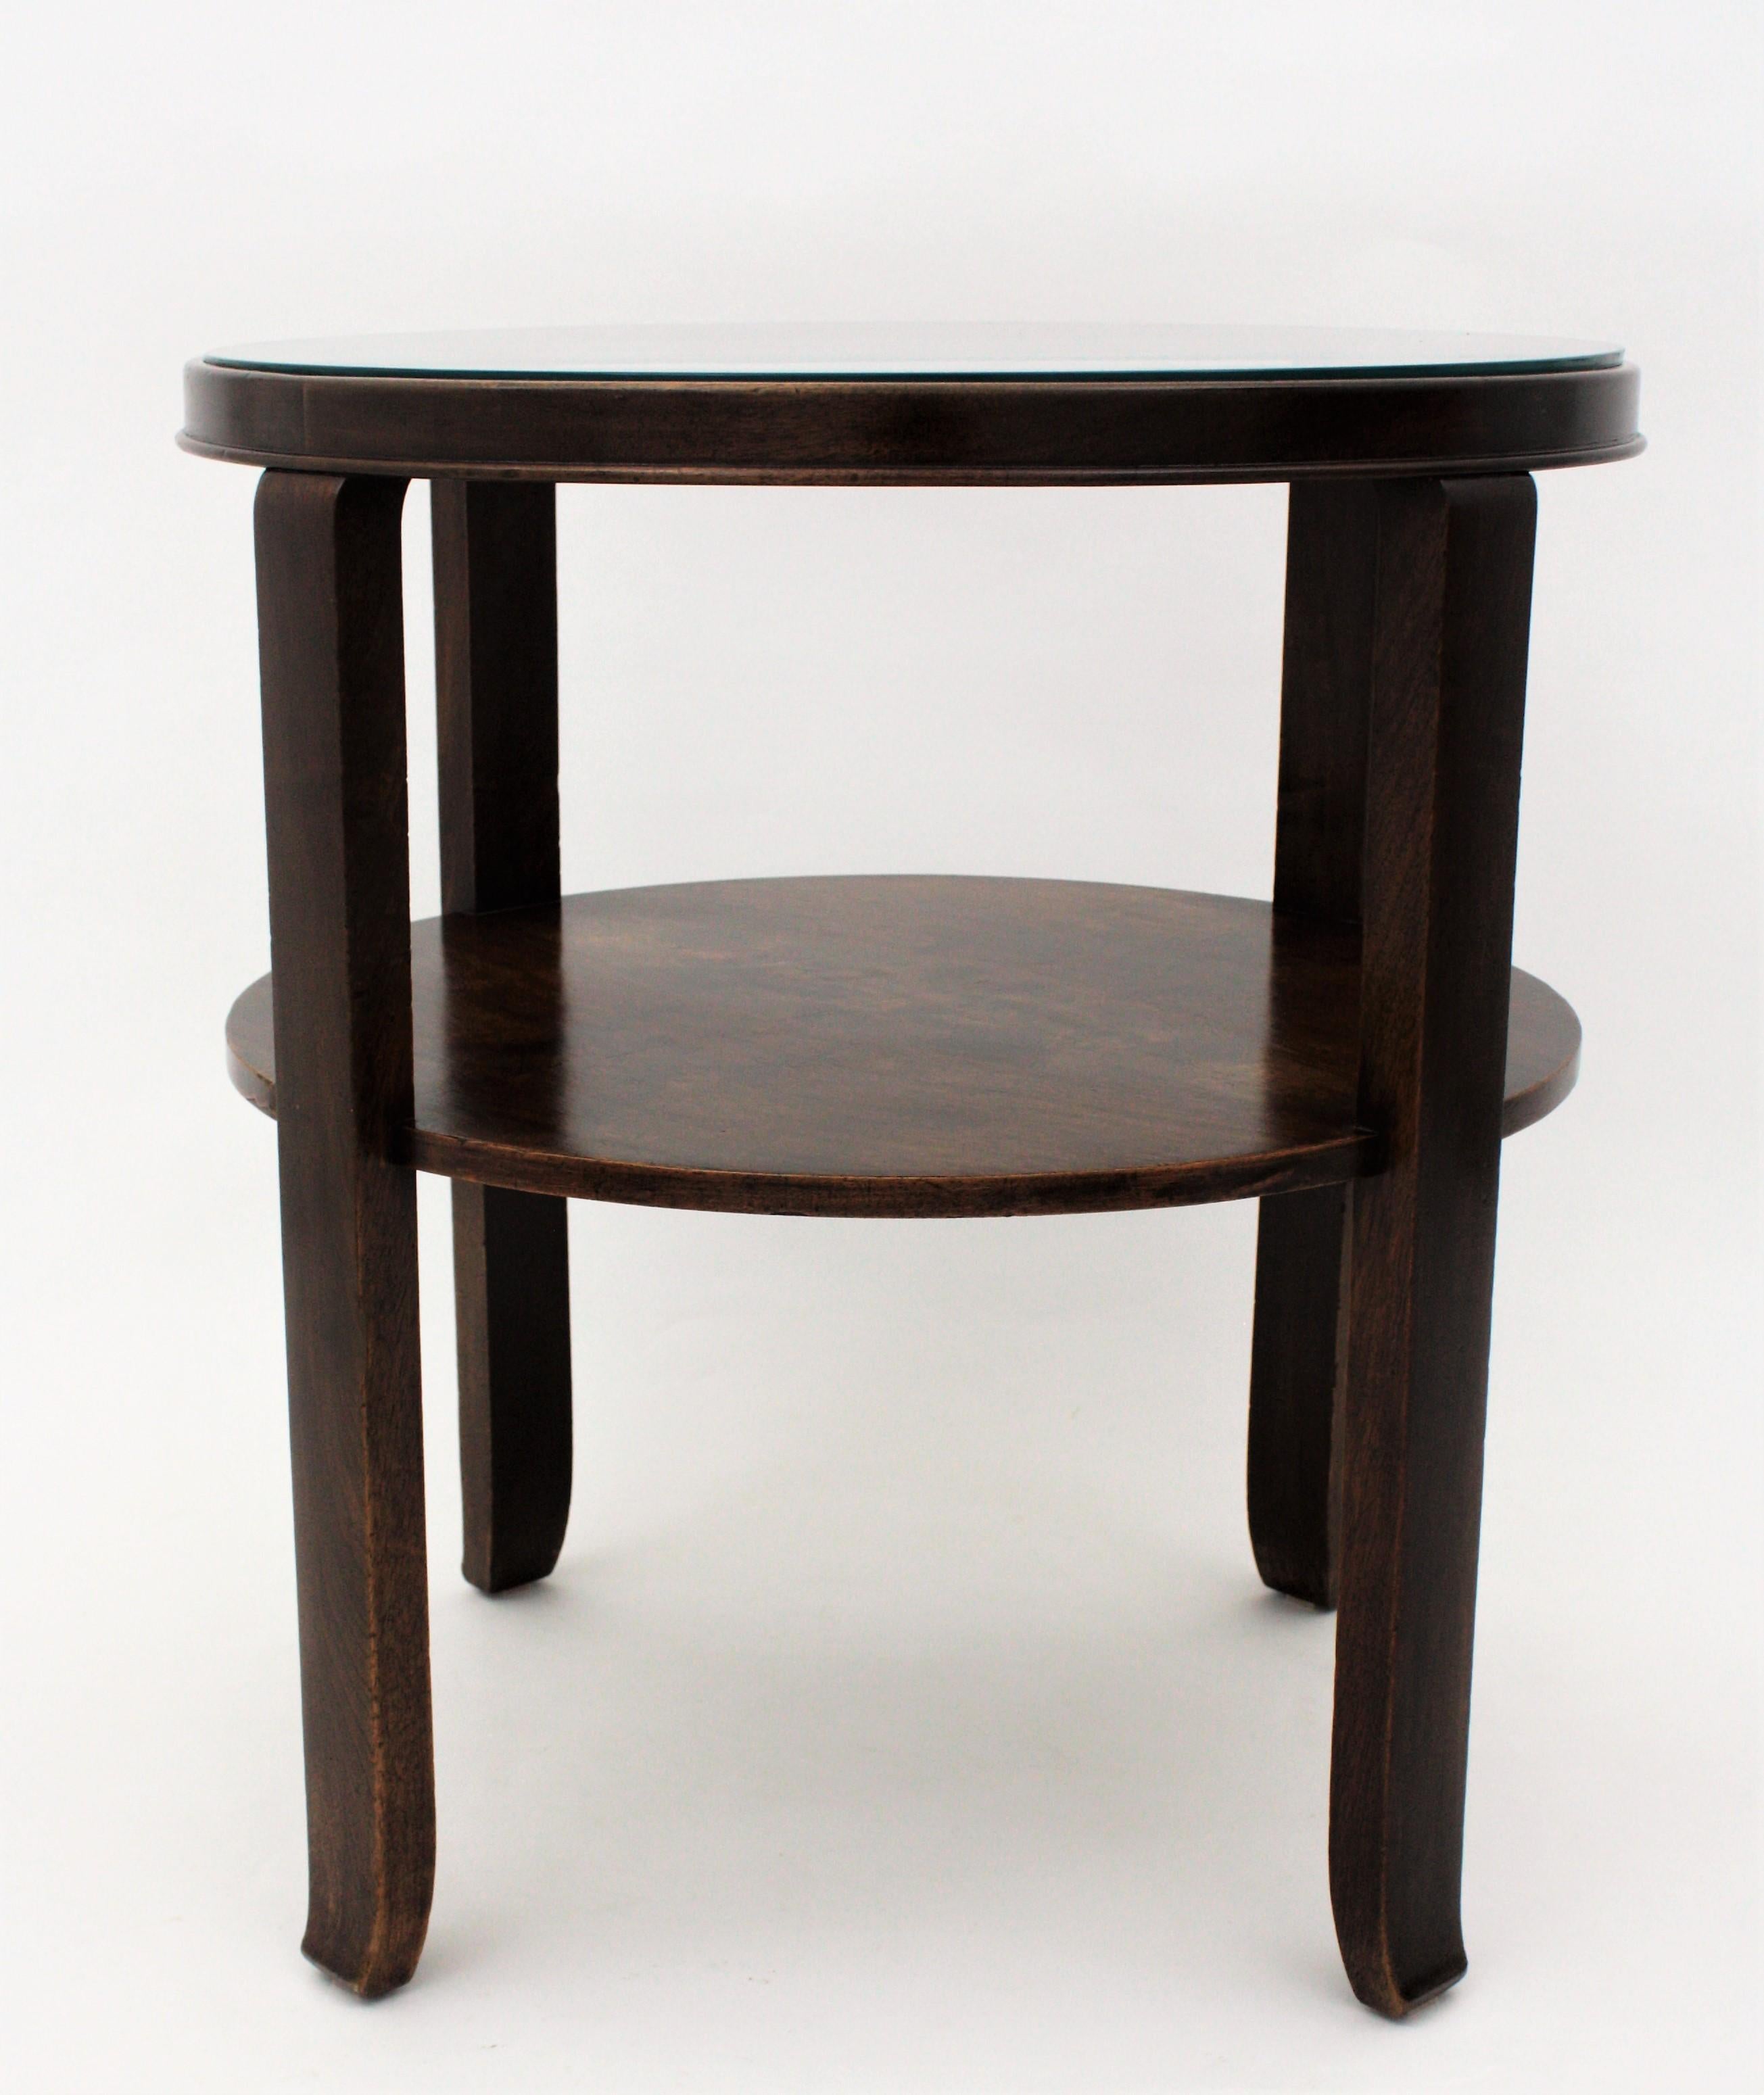 French Art Deco Two Level Coffee Table / Side Table in Walnut For Sale 4